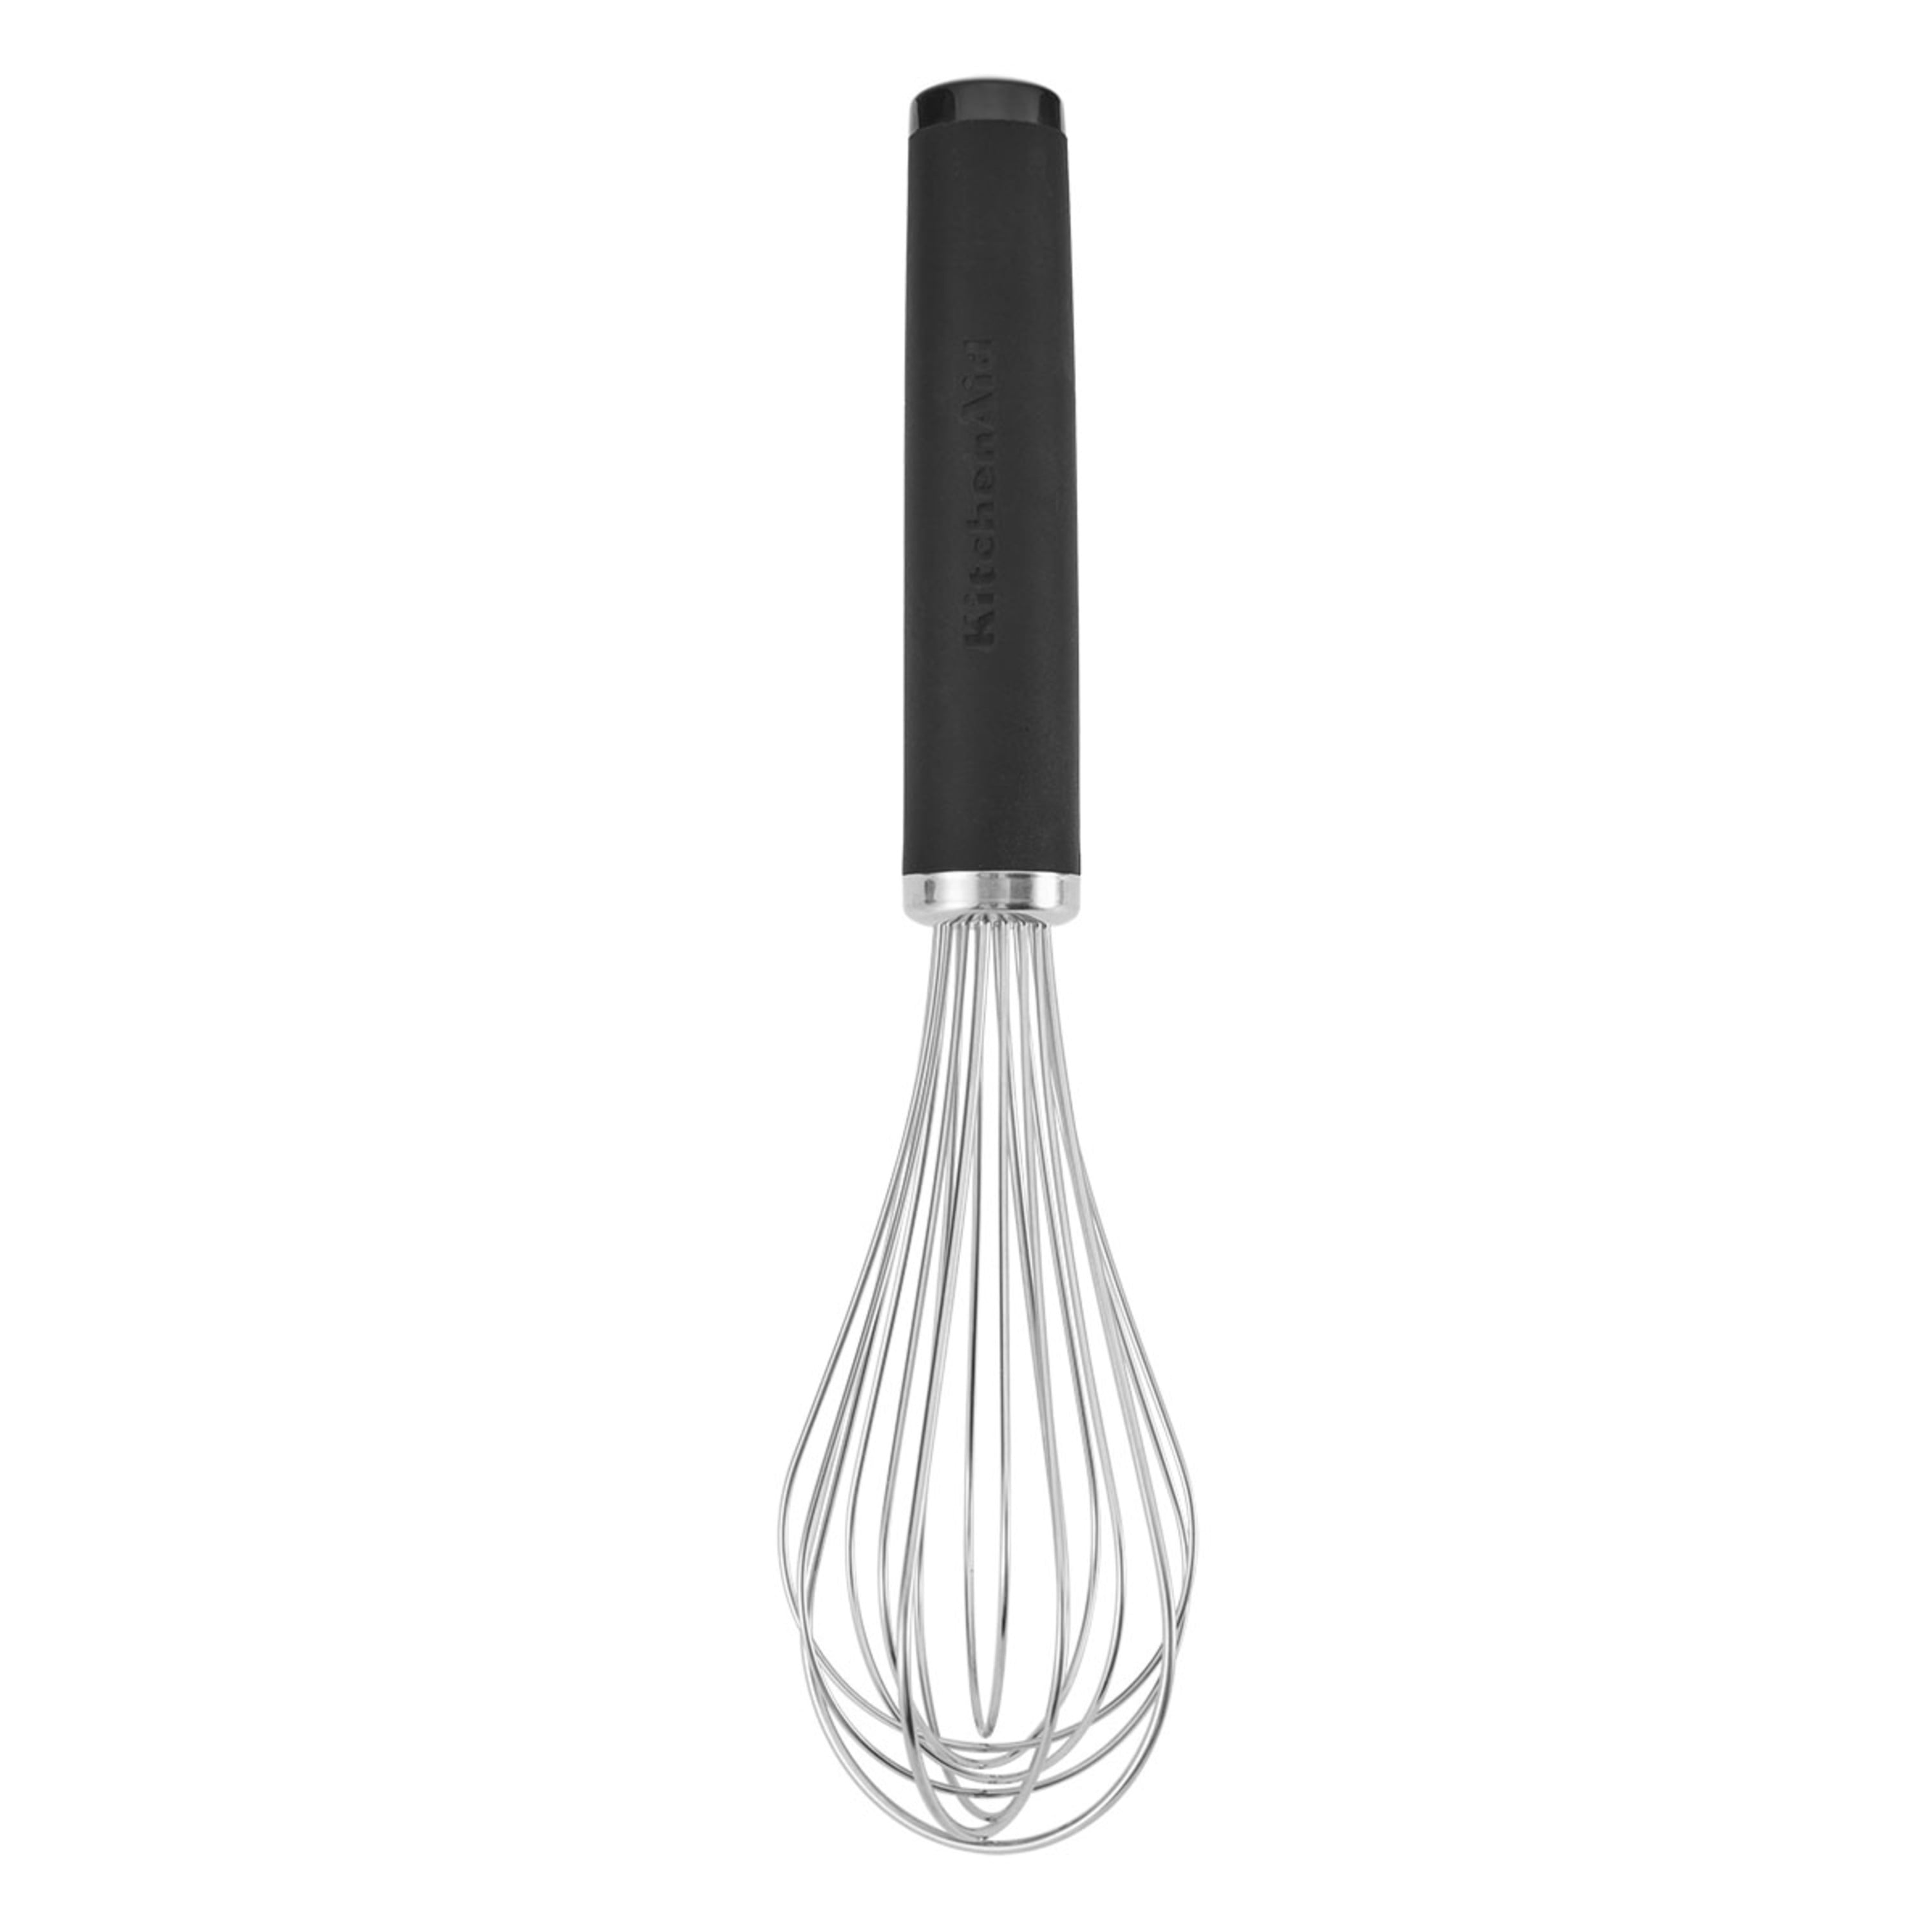  Whisk Wiper - Wipe a Whisk Easily - Multipurpose Kitchen Tool,  Made In USA - Includes 11 Stainless-Steel Whisk - Cool Baking Gadget, A  Great Gift For Men and Women (Color